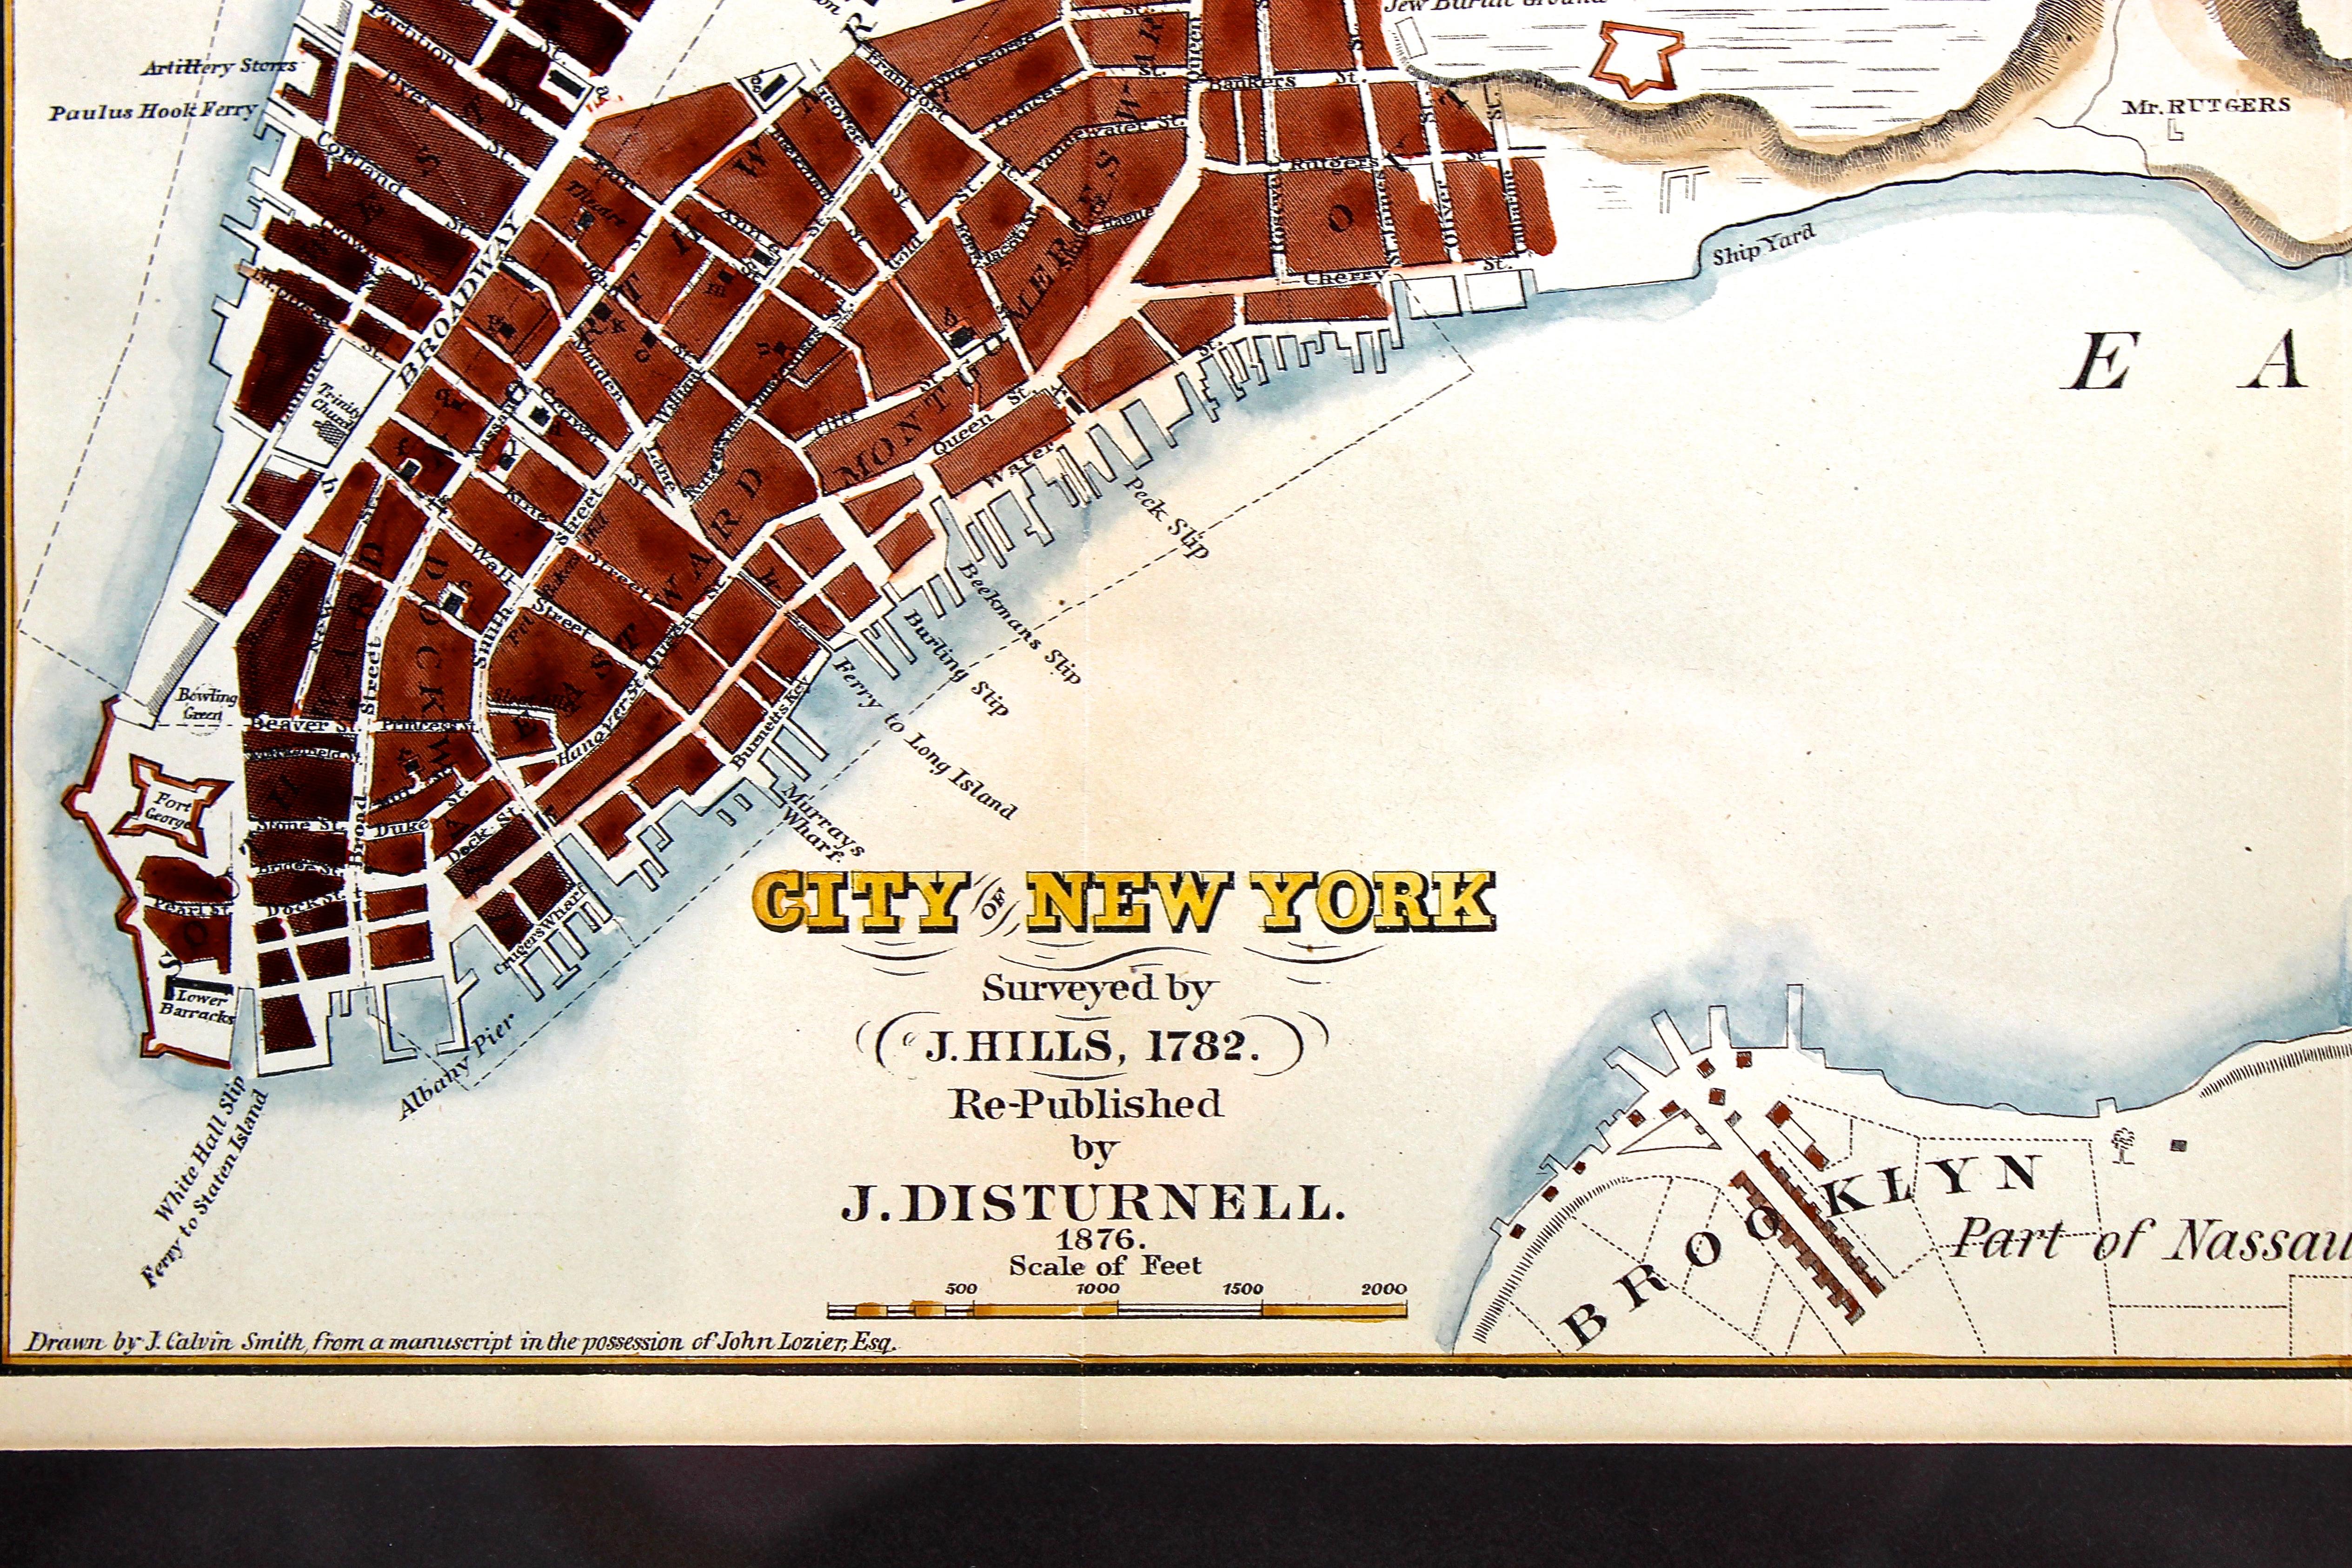 This original map of the city of New York was first surveyed by J. Hills in 1782 and was later re-published by J. Disturnell in 1876, as is shown here. The plan includes detailed hand-coloring. The map was drawn by J. Calvin Smith, printed by Snyder